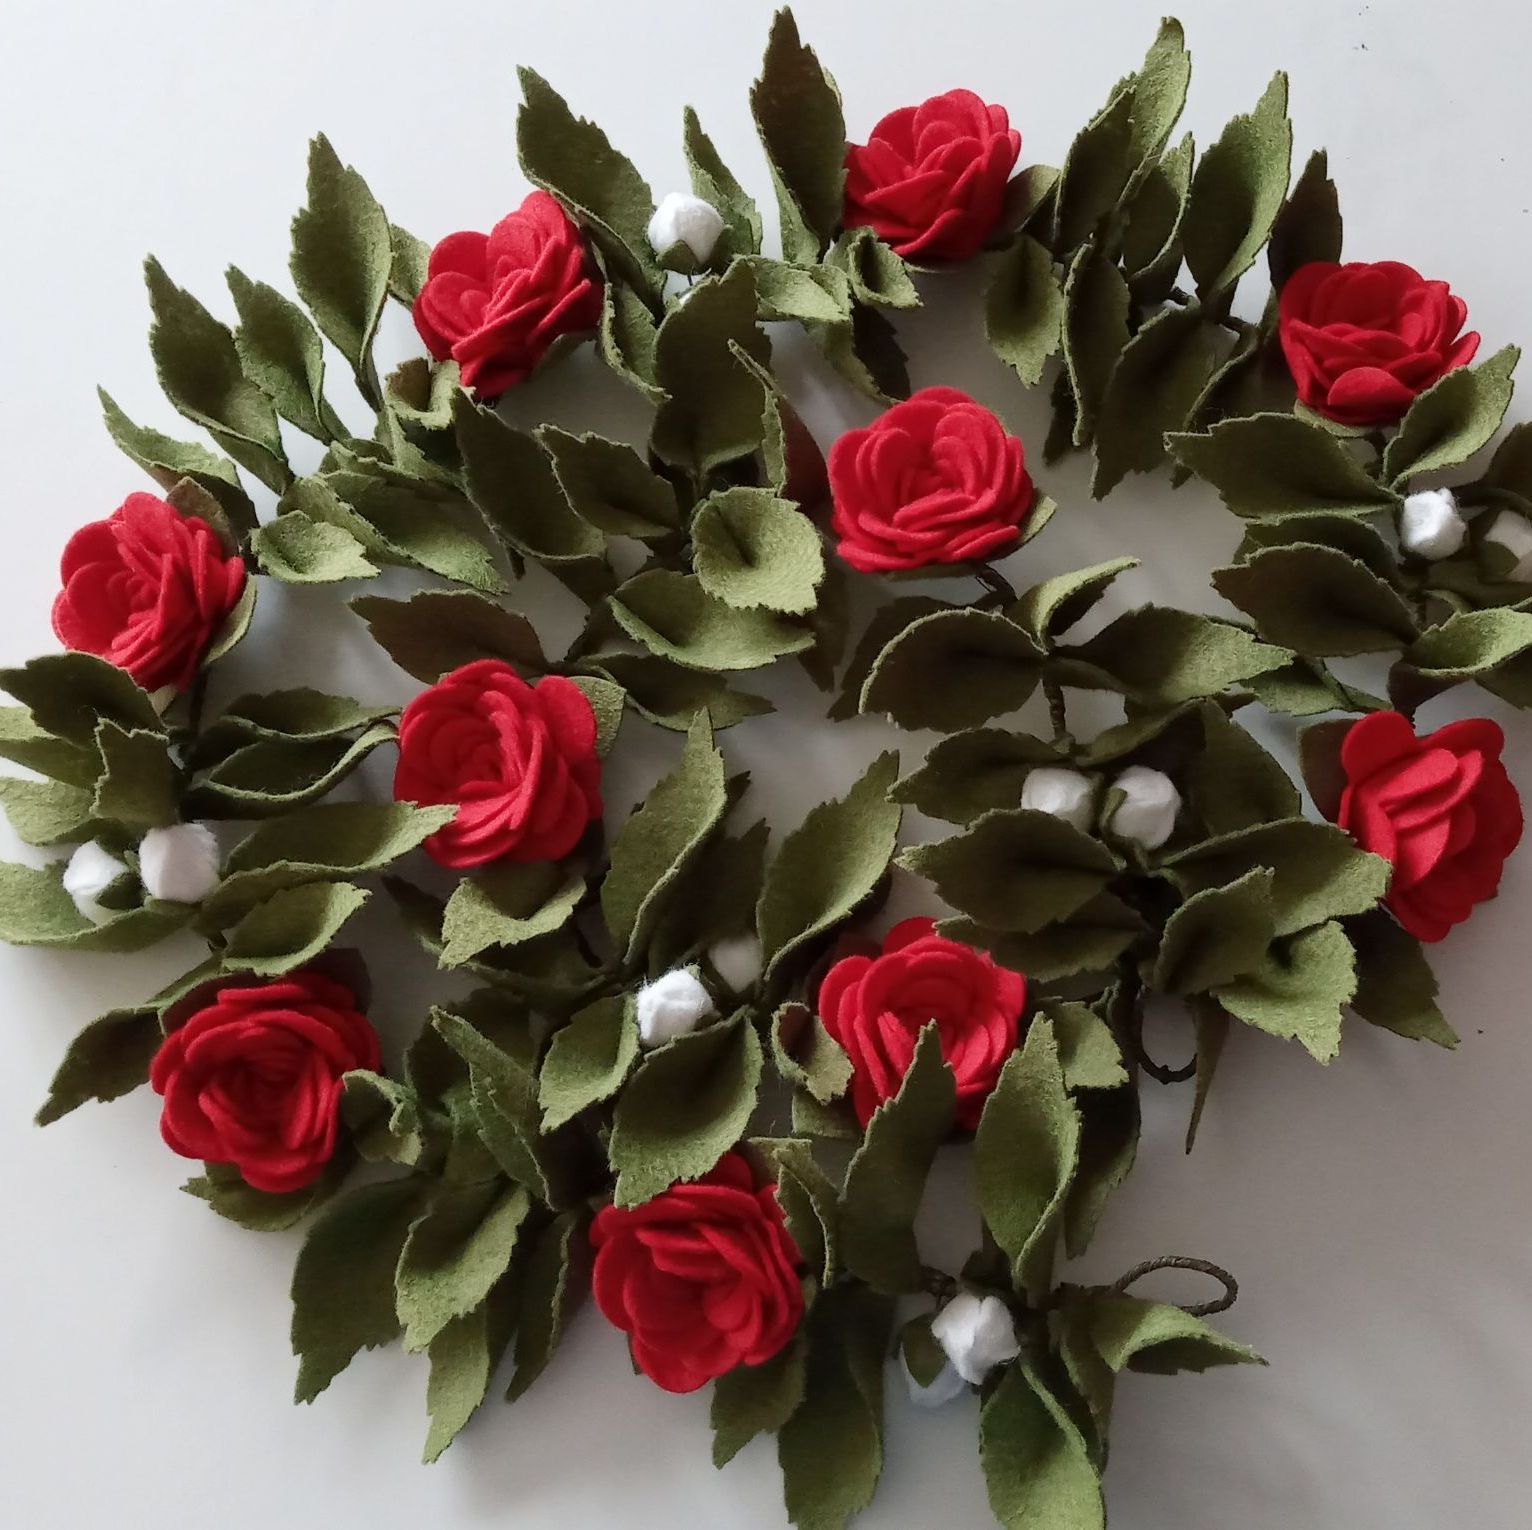 A garland of 10 felt red roses and foliage